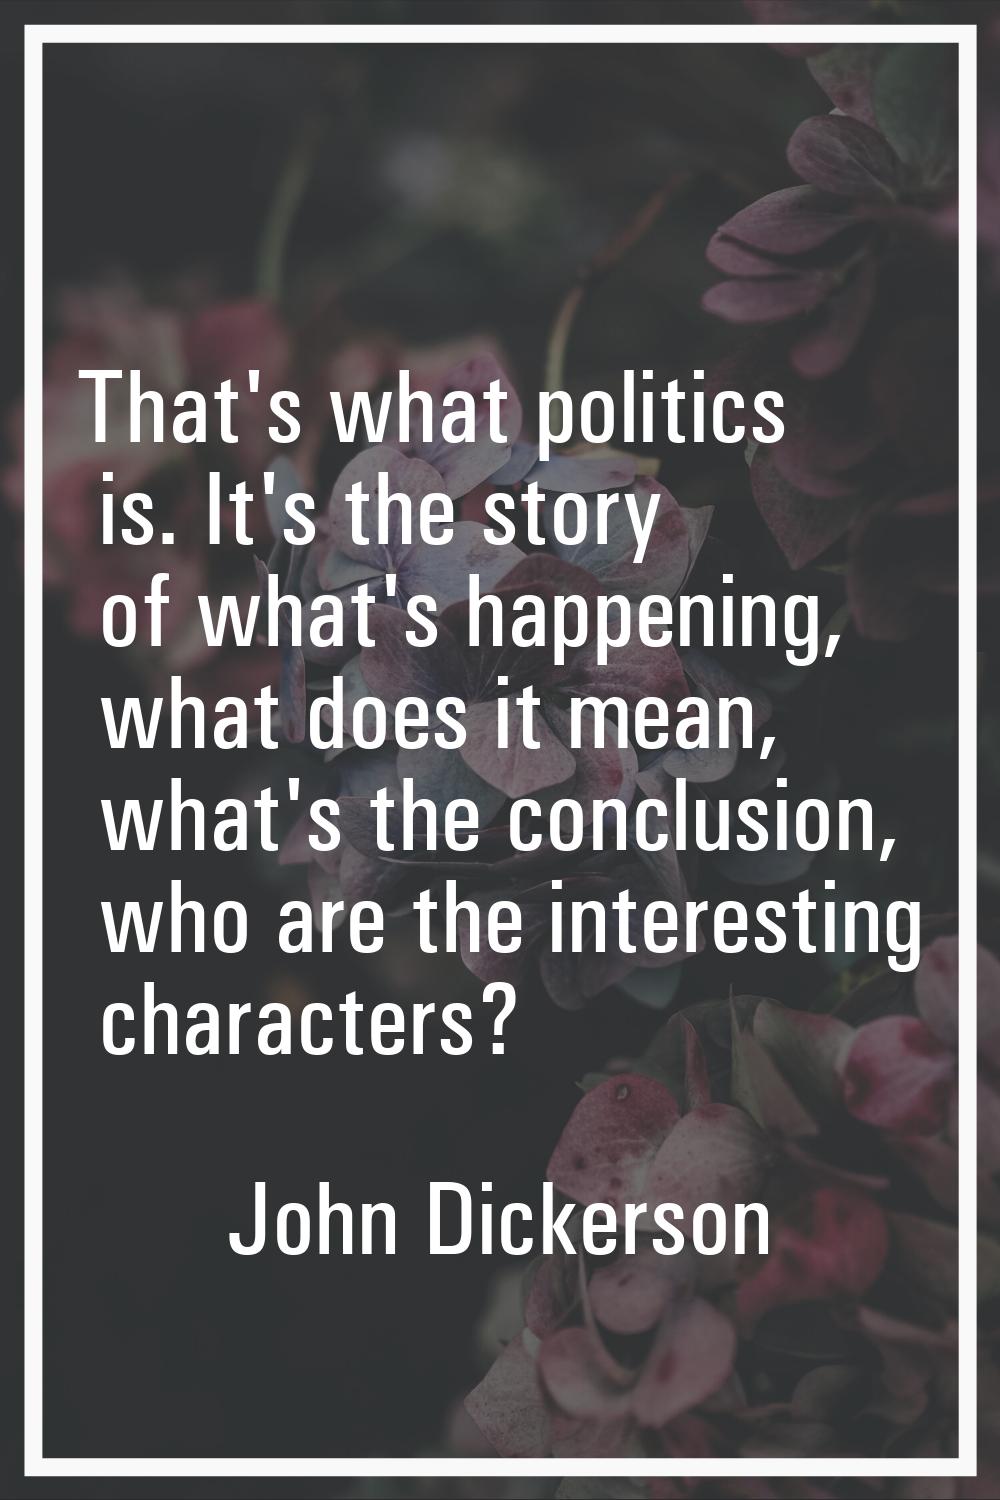 That's what politics is. It's the story of what's happening, what does it mean, what's the conclusi